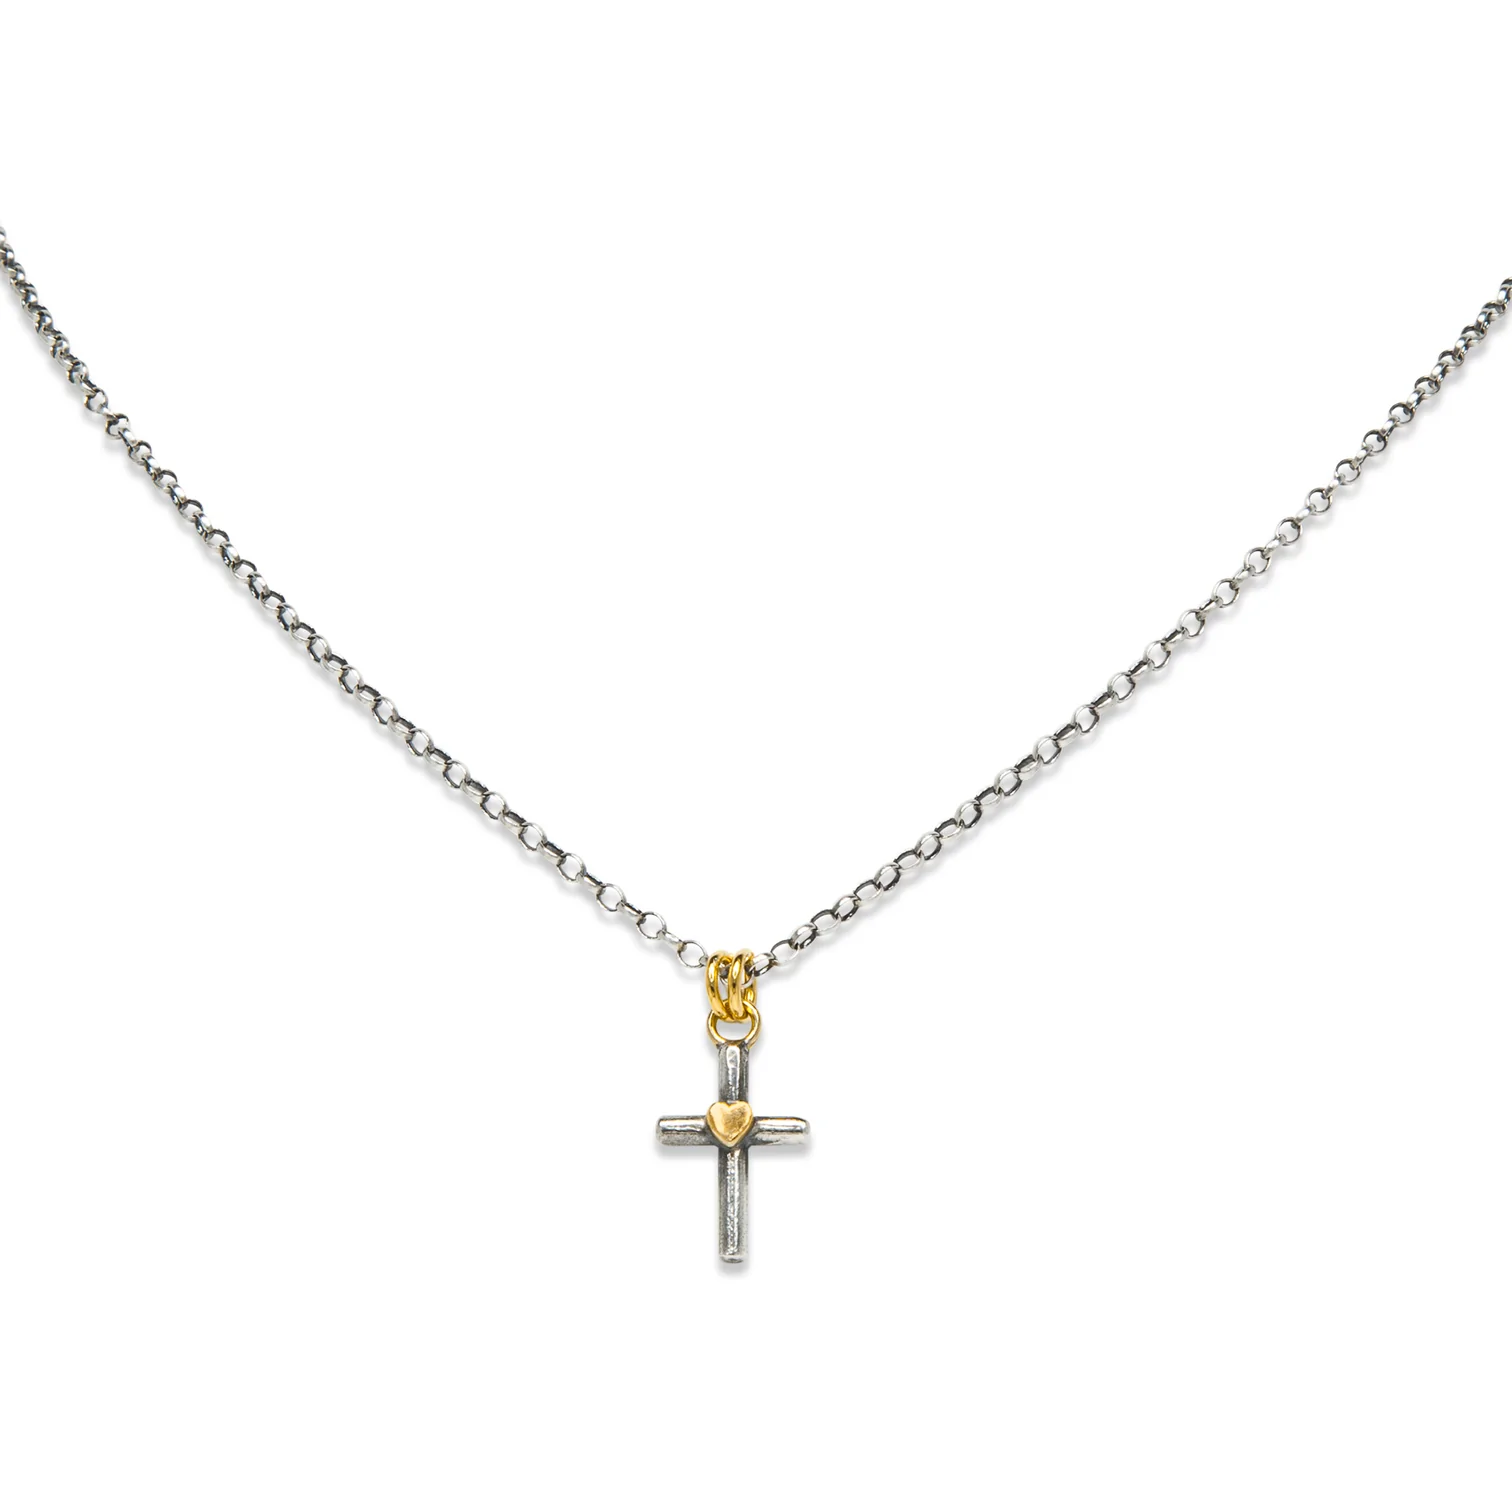 Tinycrossnecklace_1512x